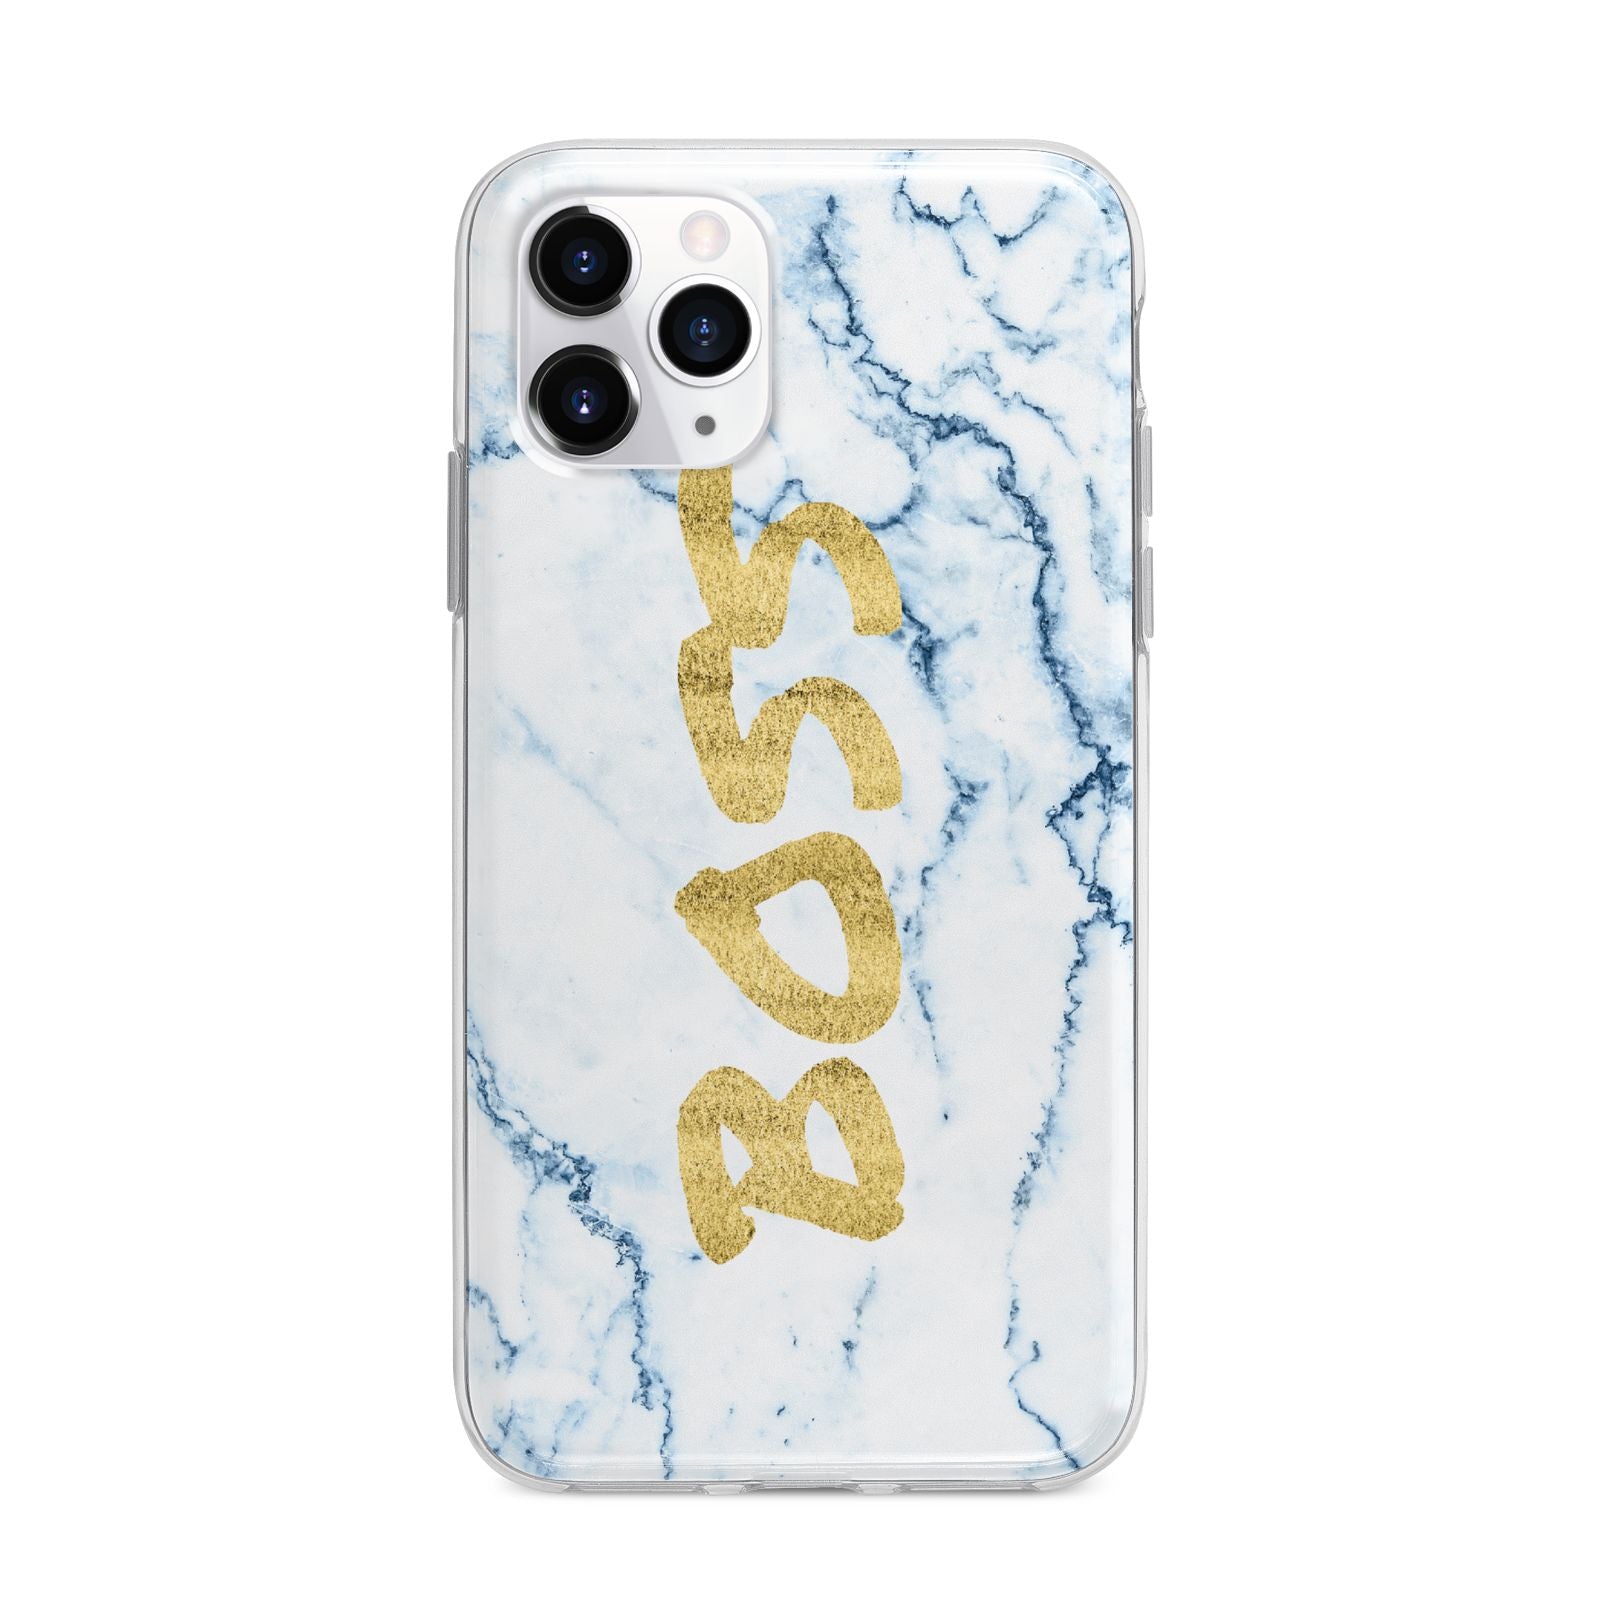 Boss Gold Blue Marble Effect Apple iPhone 11 Pro Max in Silver with Bumper Case